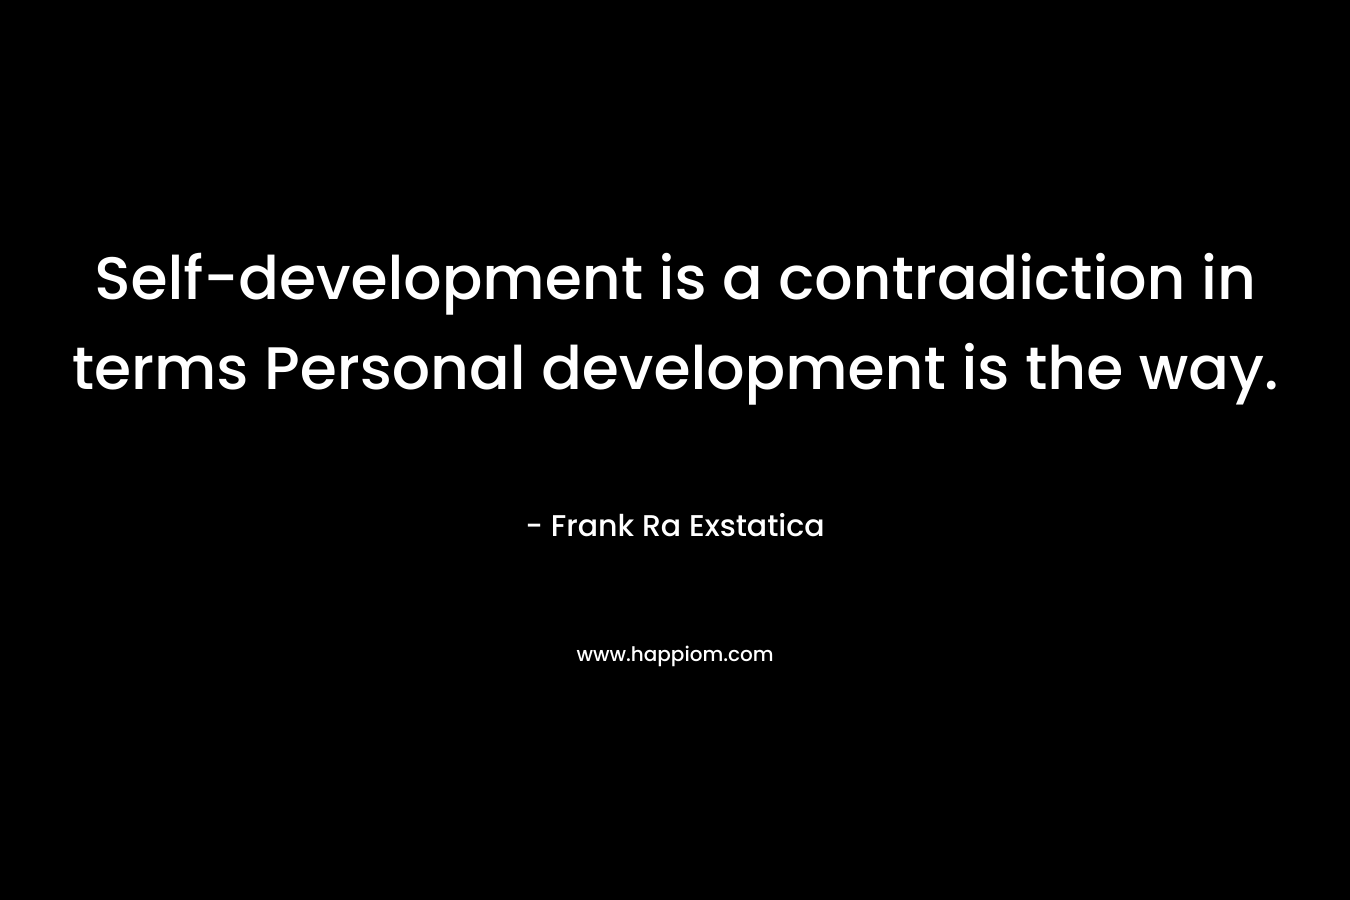 Self-development is a contradiction in terms Personal development is the way. – Frank Ra Exstatica